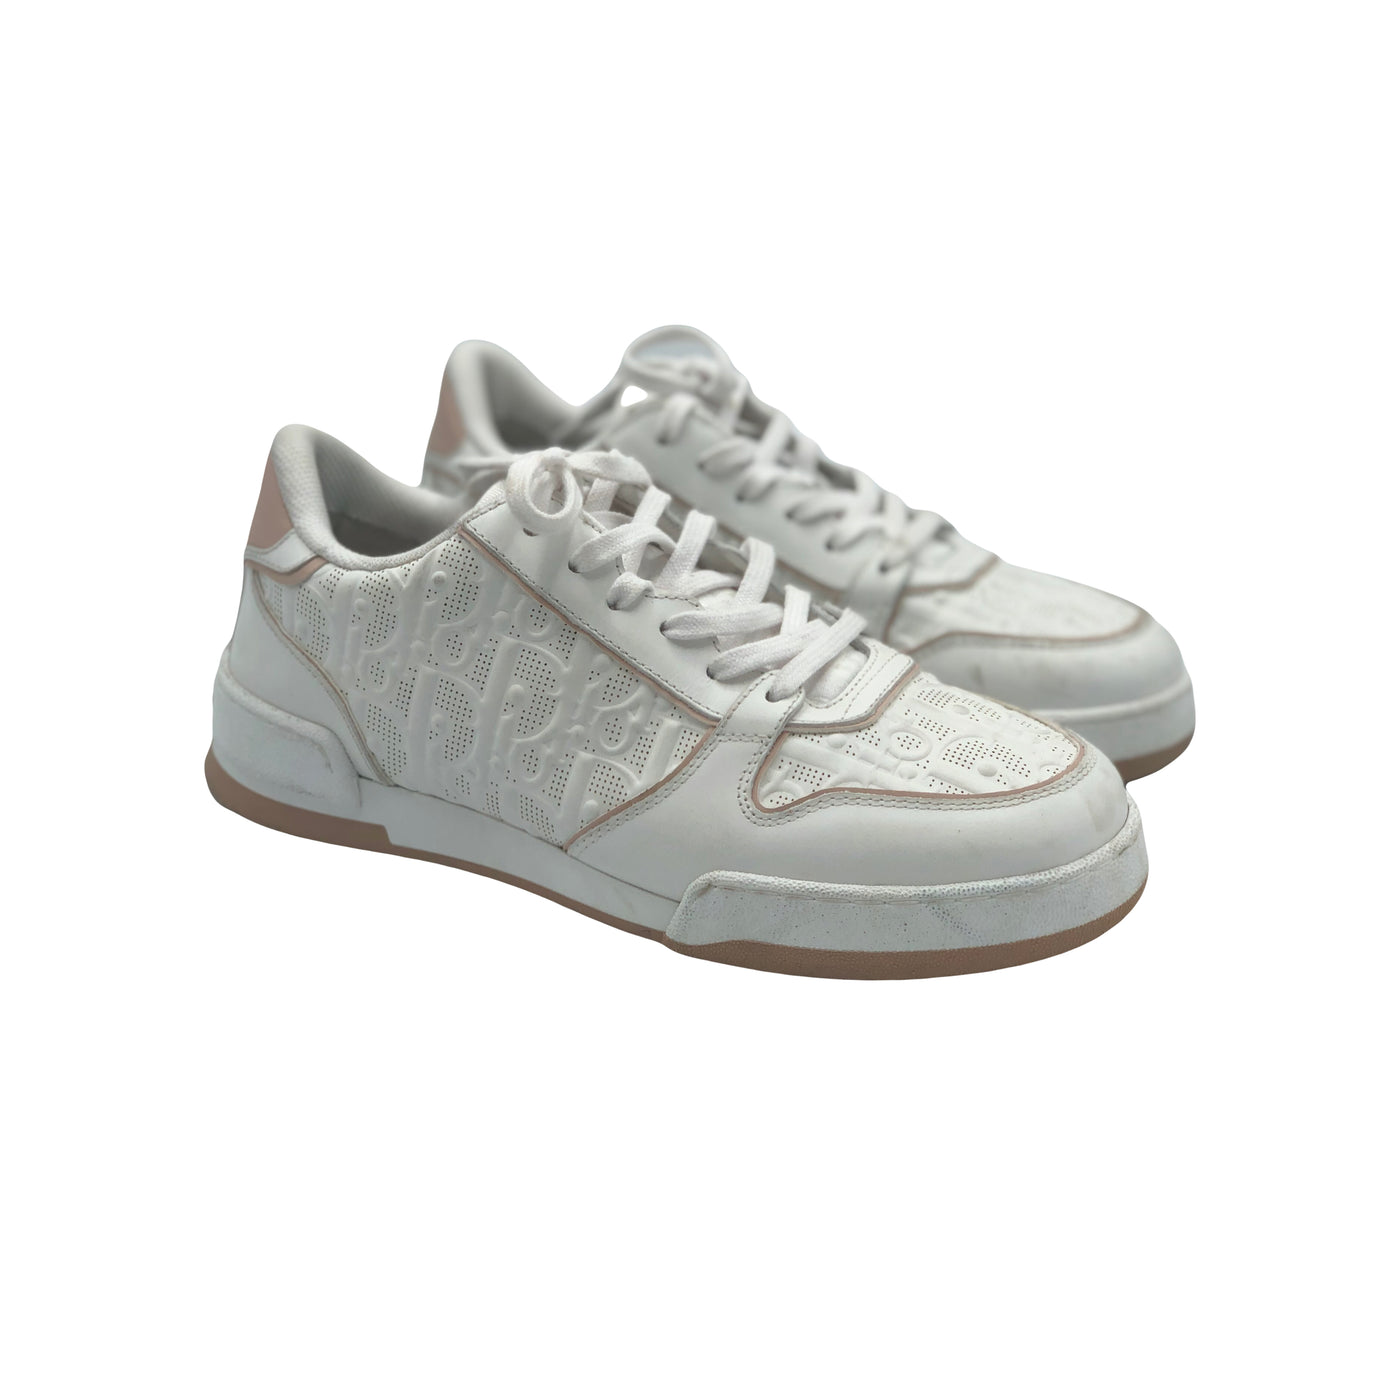 CHRISTIAN DIOR One Sneaker nude and white perforated size 36 RRP: £860